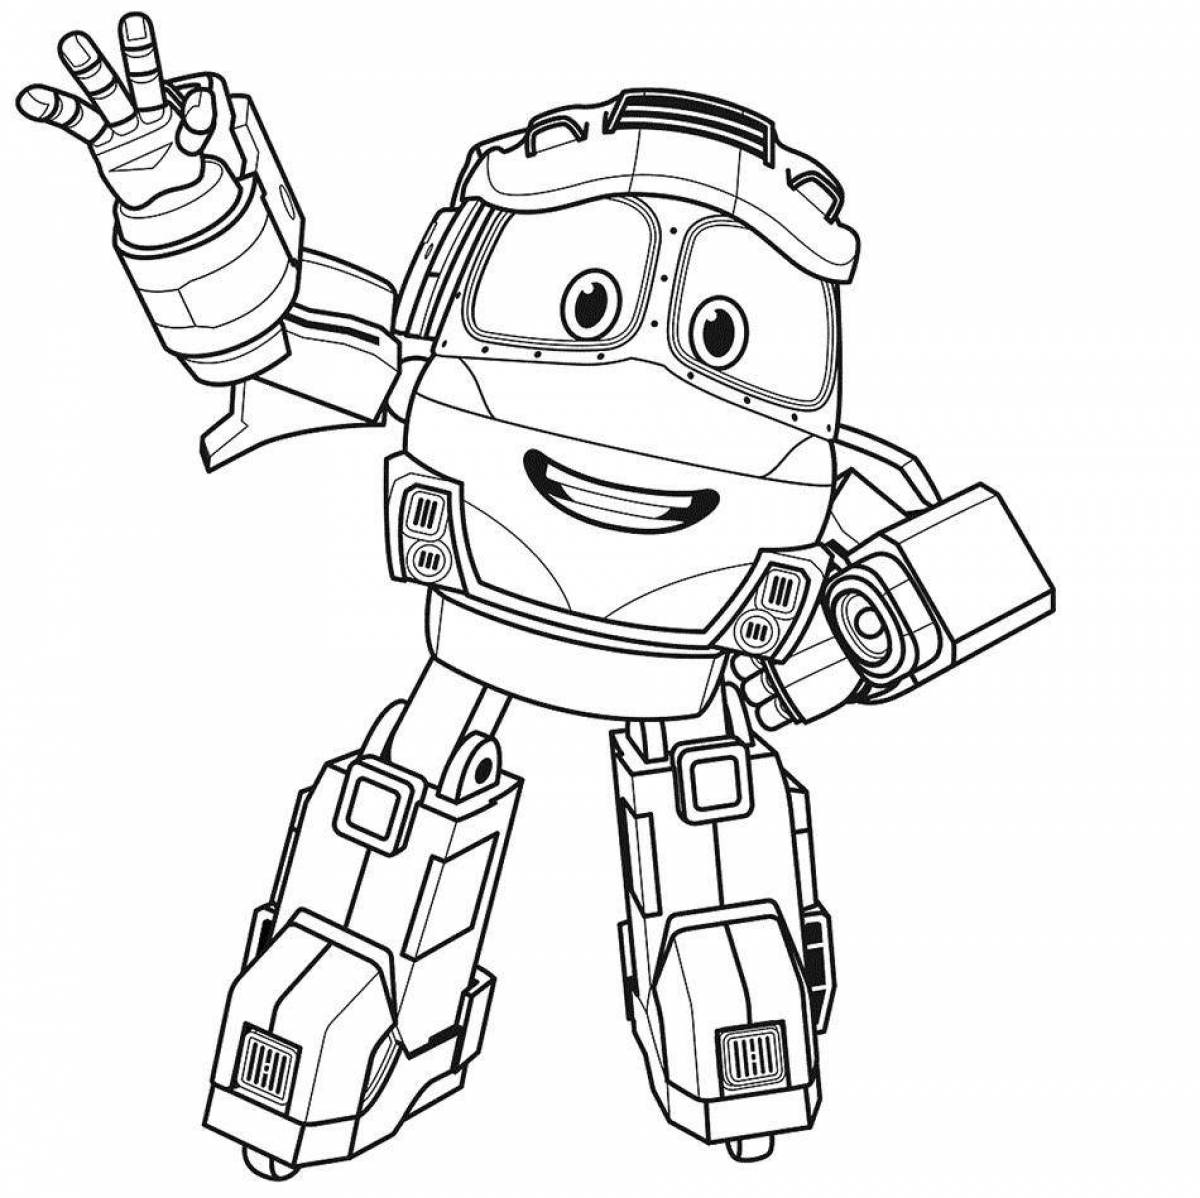 Crazy robot tobot coloring page